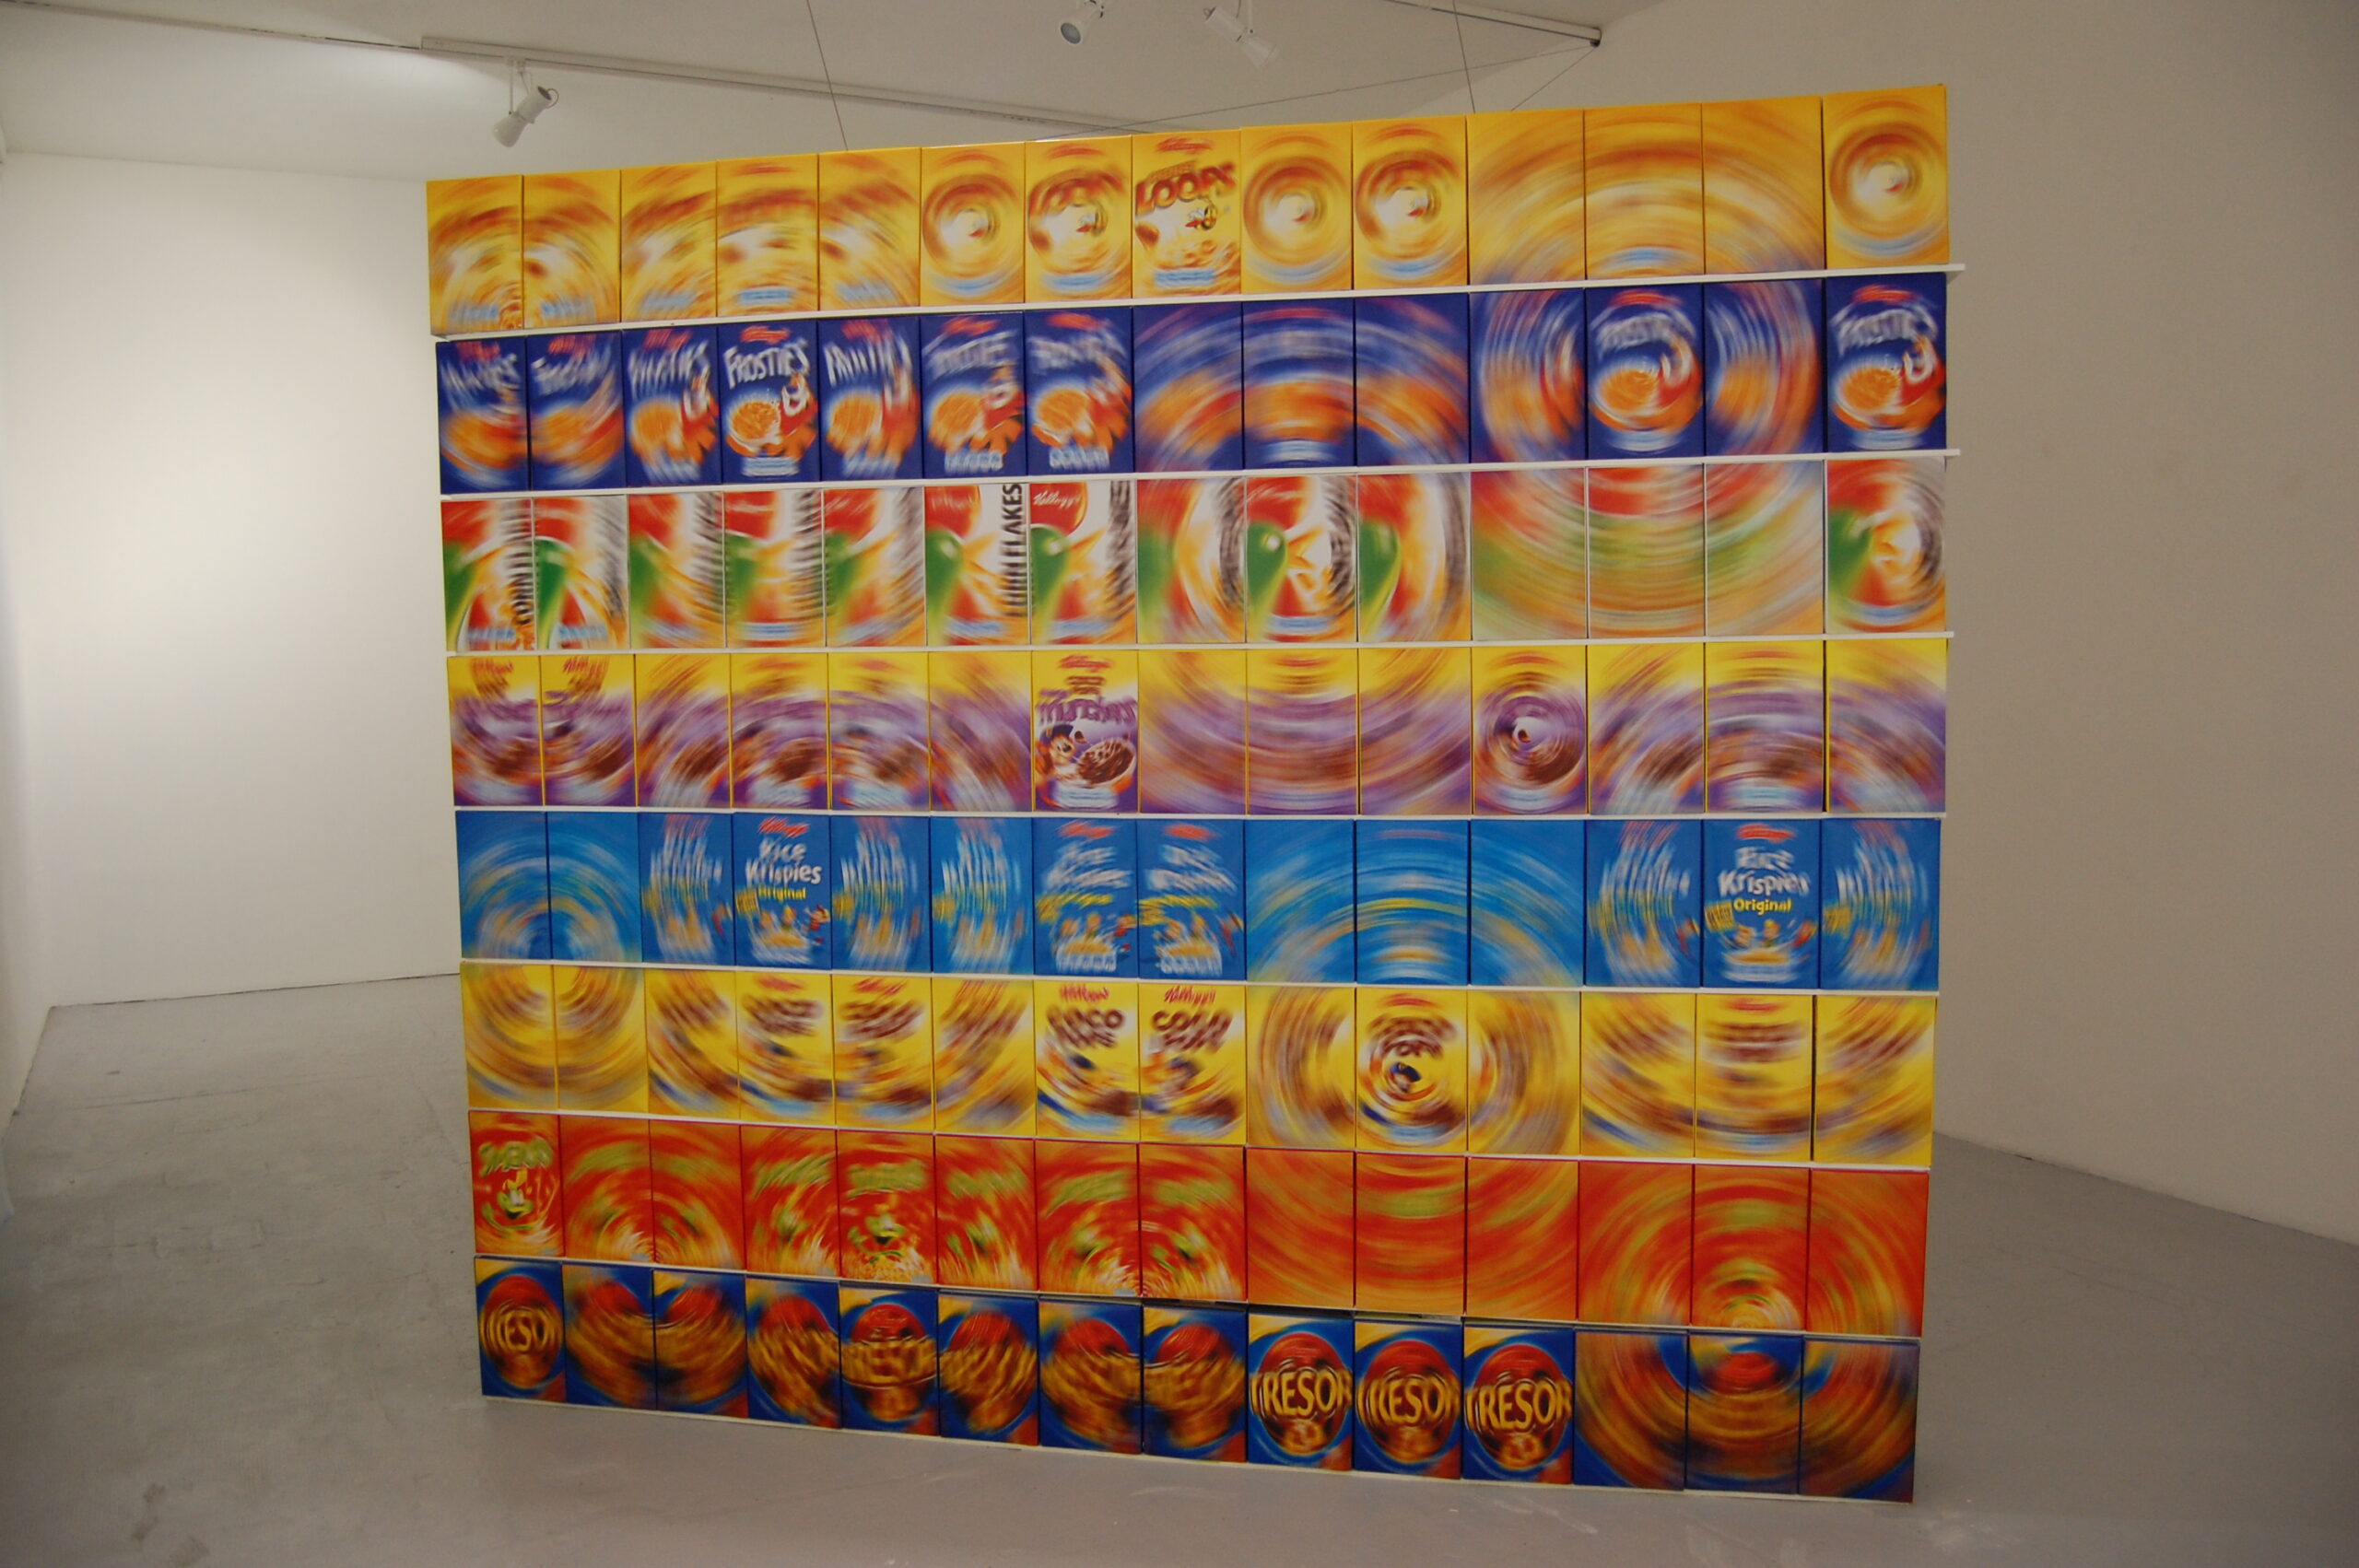 a thin but wide column of cereal boxes with their labels blurred into spirals